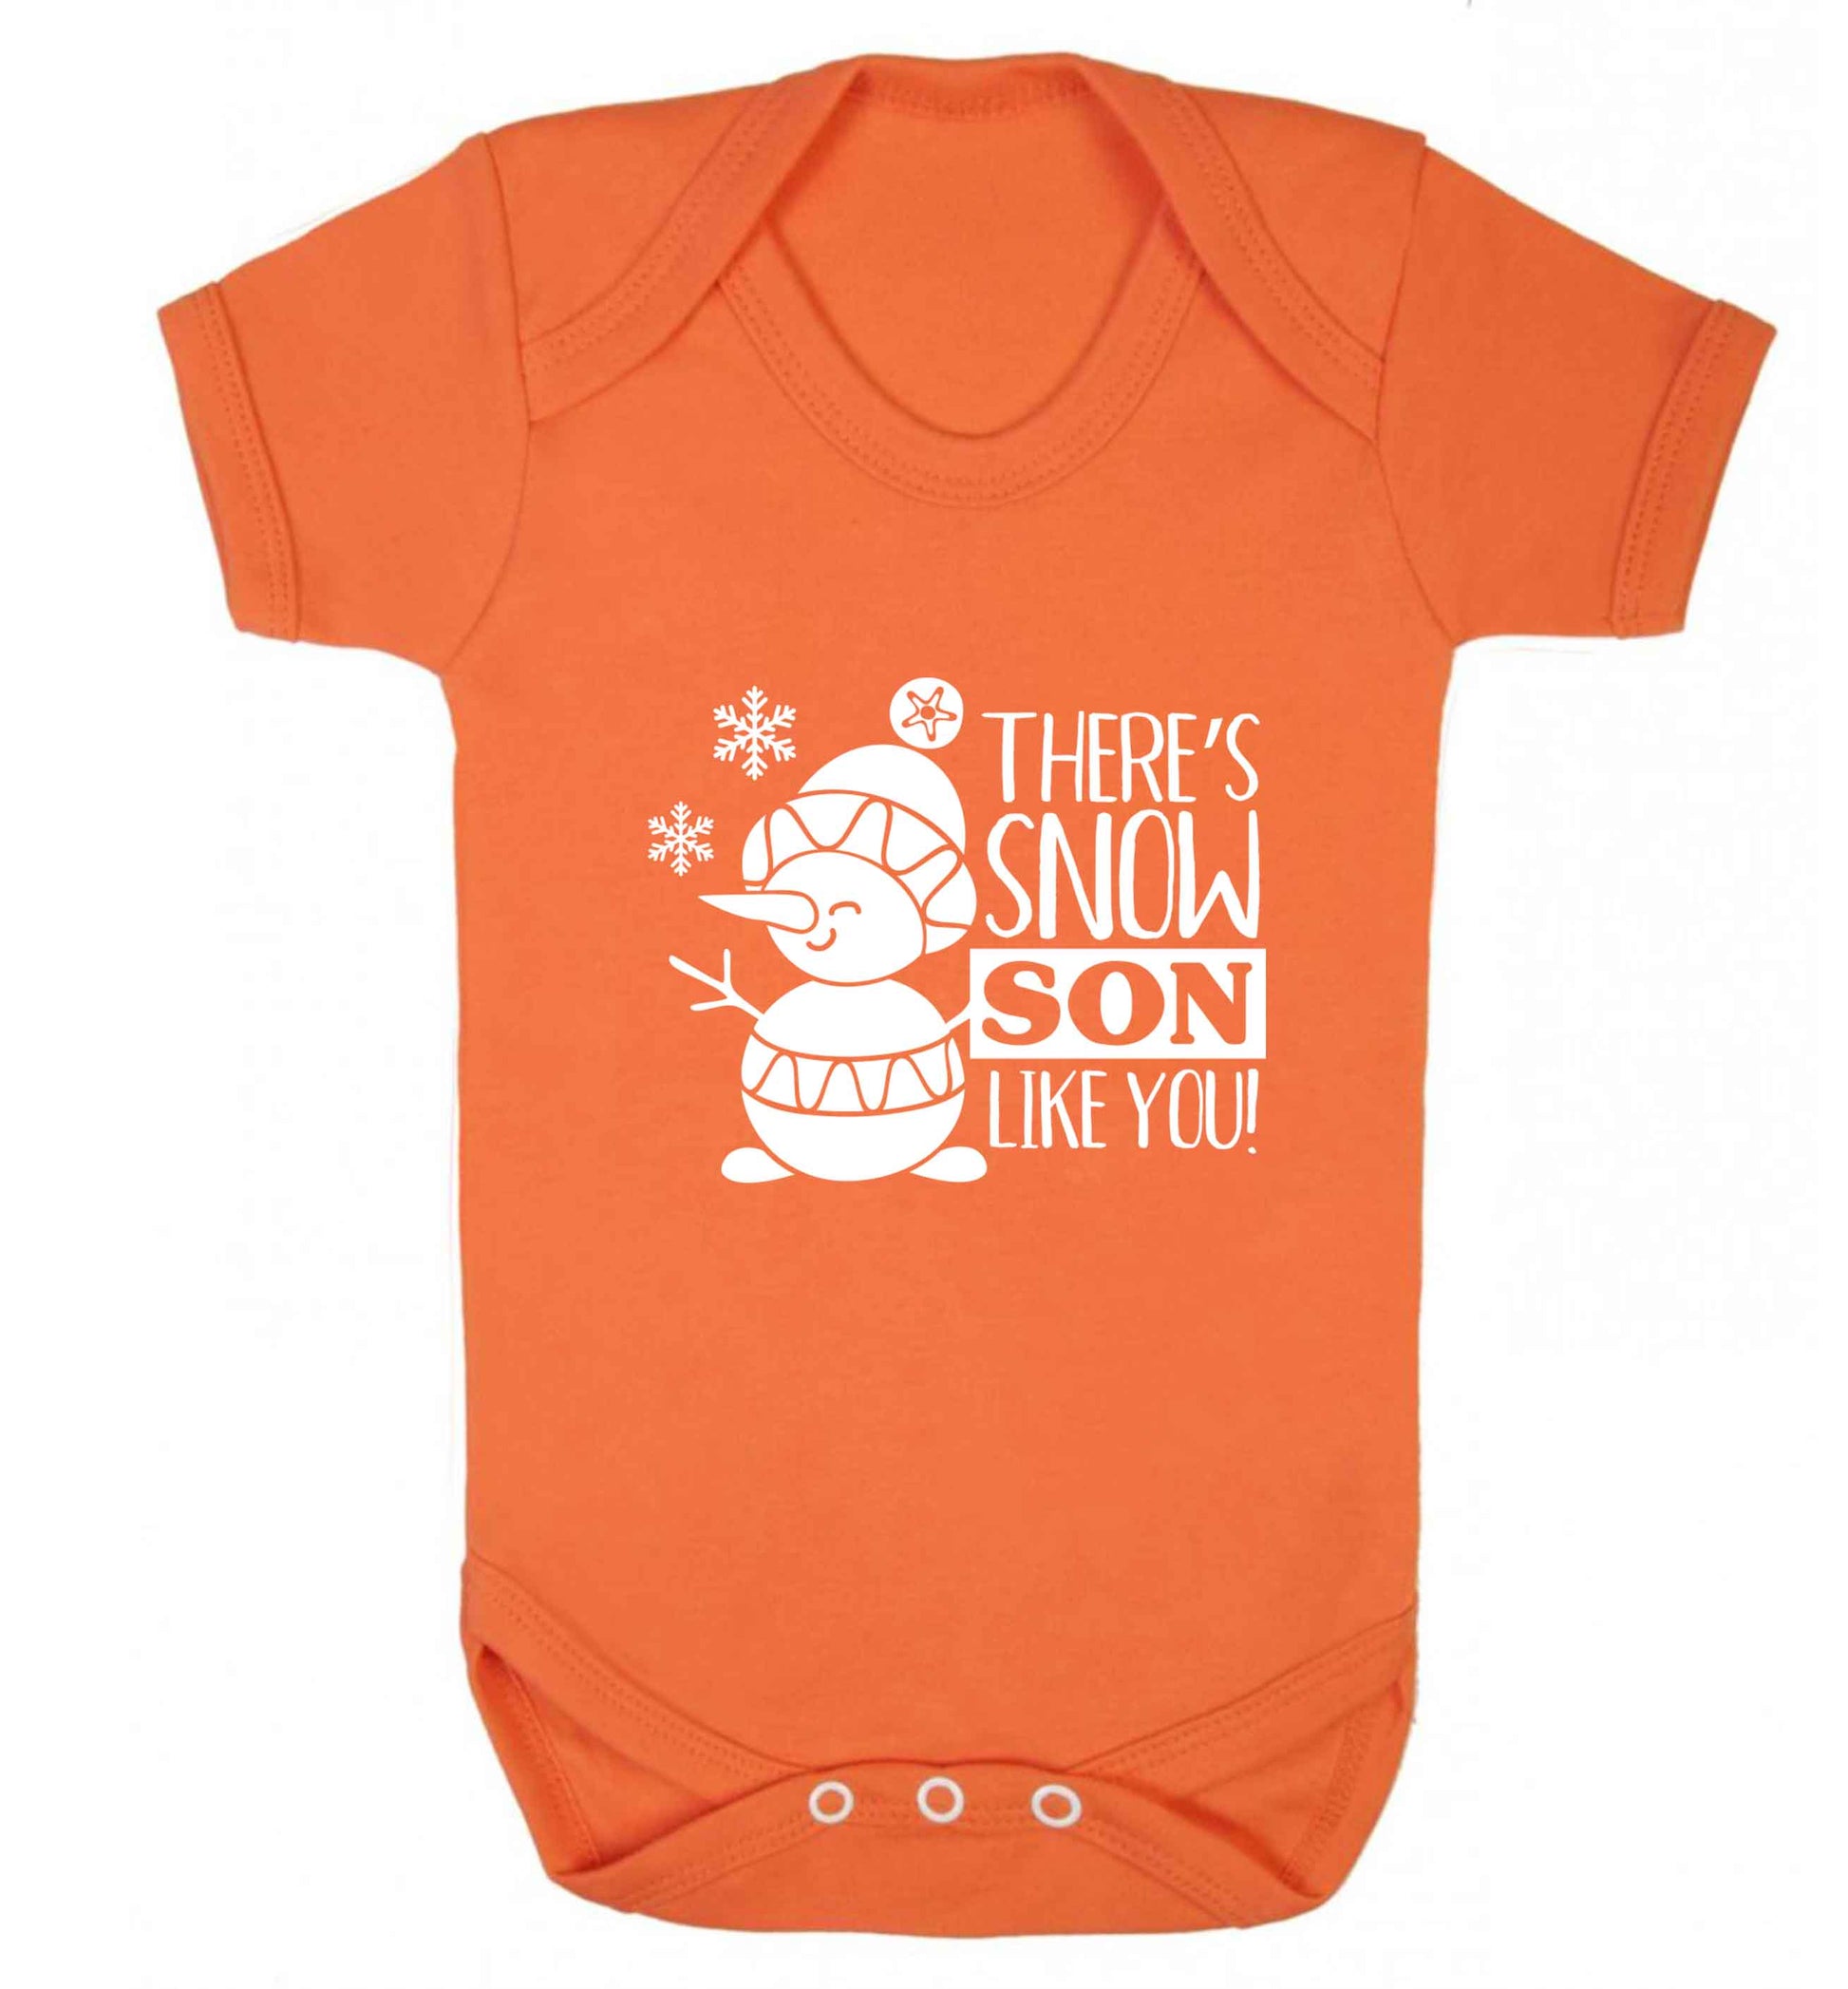 There's snow son like you baby vest orange 18-24 months